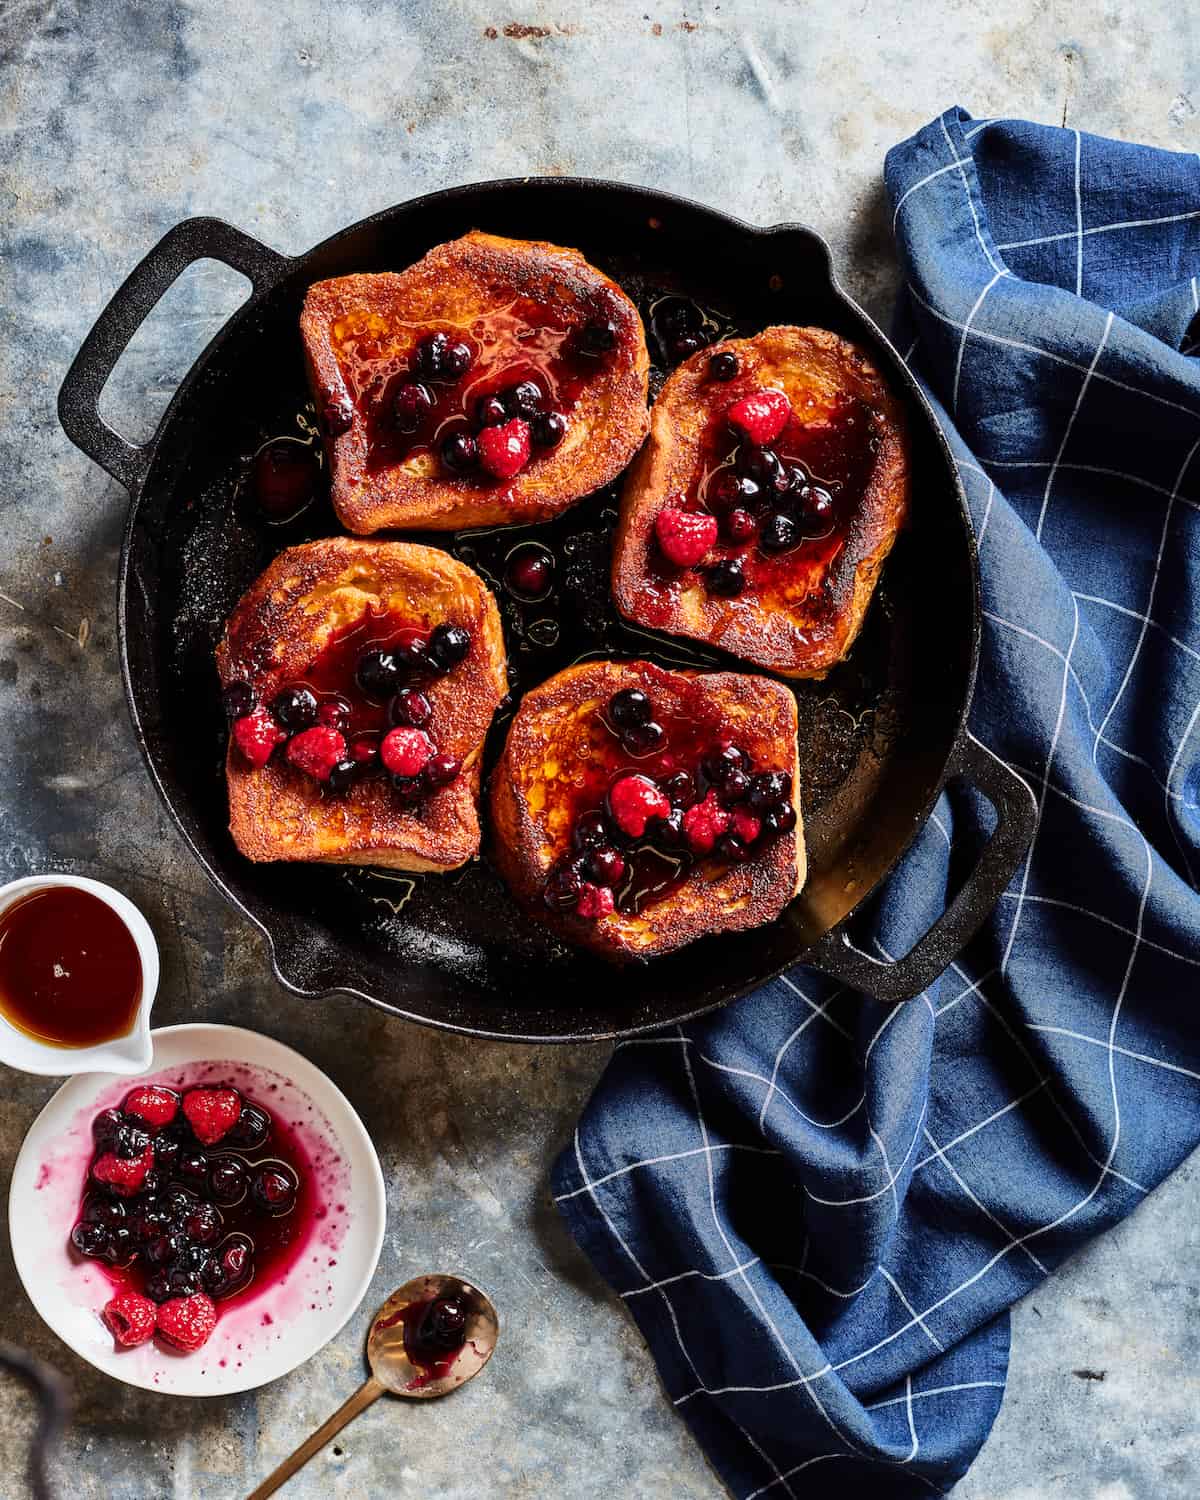 Caramelized French Toast with Berry Compote in a skillet placed on a blue kitchen towel with a side serving of berry compote and maple syrup.